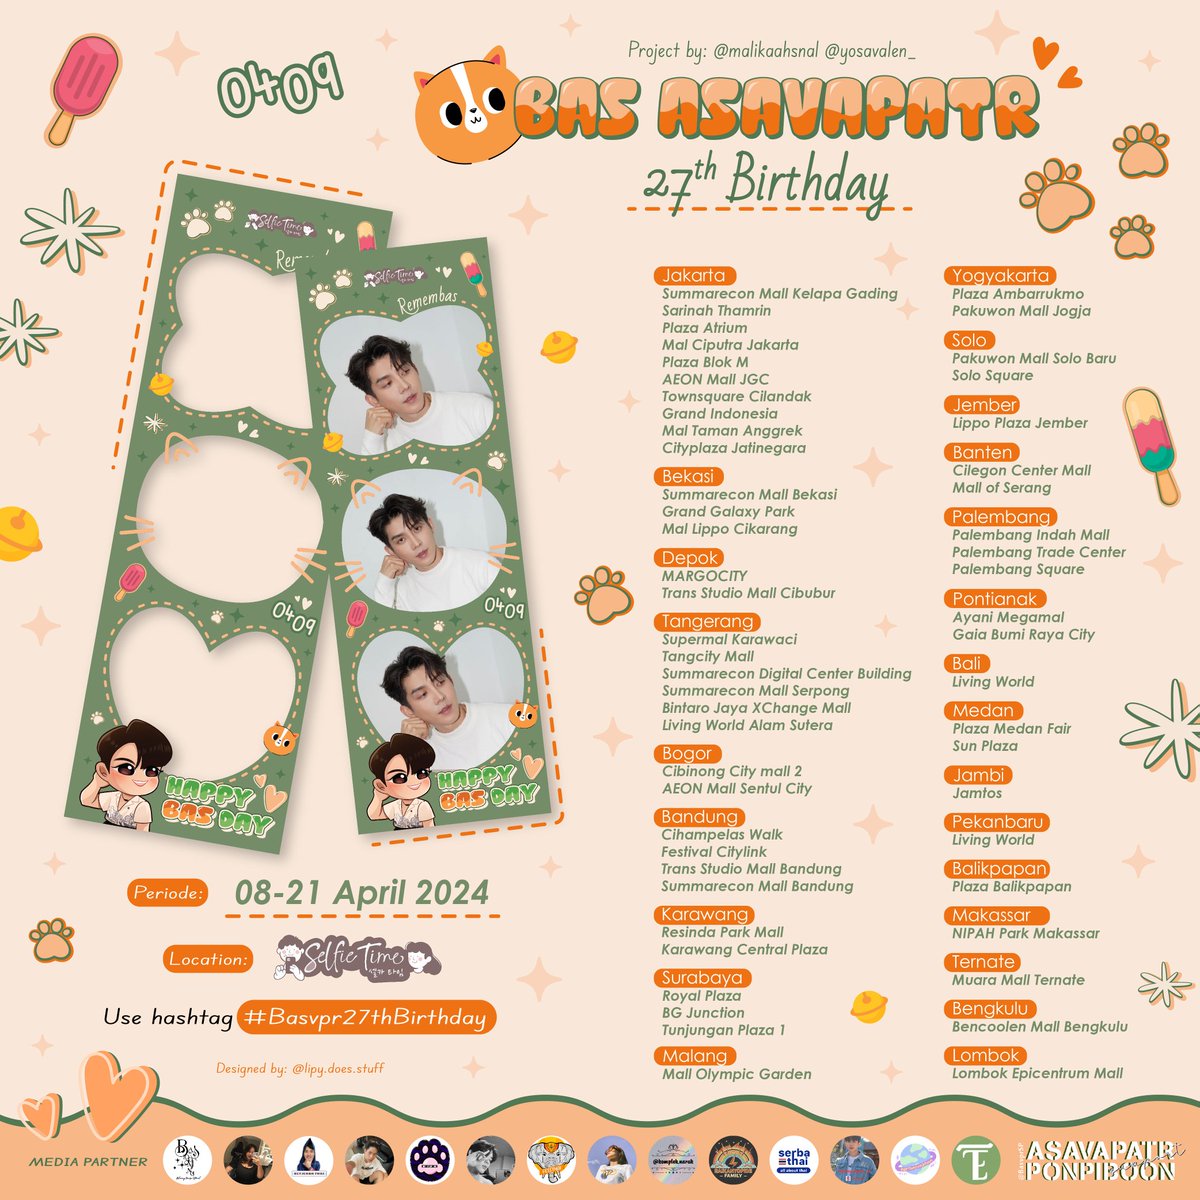 💚🍦Bas Asavapatr's Birthday🍦💚 @basvpr_ Birthday Photobooth Event 📸 ~ by @malikaahsnal @yosavalen_ 🗒 8 - 21 April 2024 📍 All @selfietimeid Photobooth Show us your brightest smile, Remembas!🥰 tag us and use the hashtags💚 #Basvpr #Remembas #Basvpr27thBirthdayProject